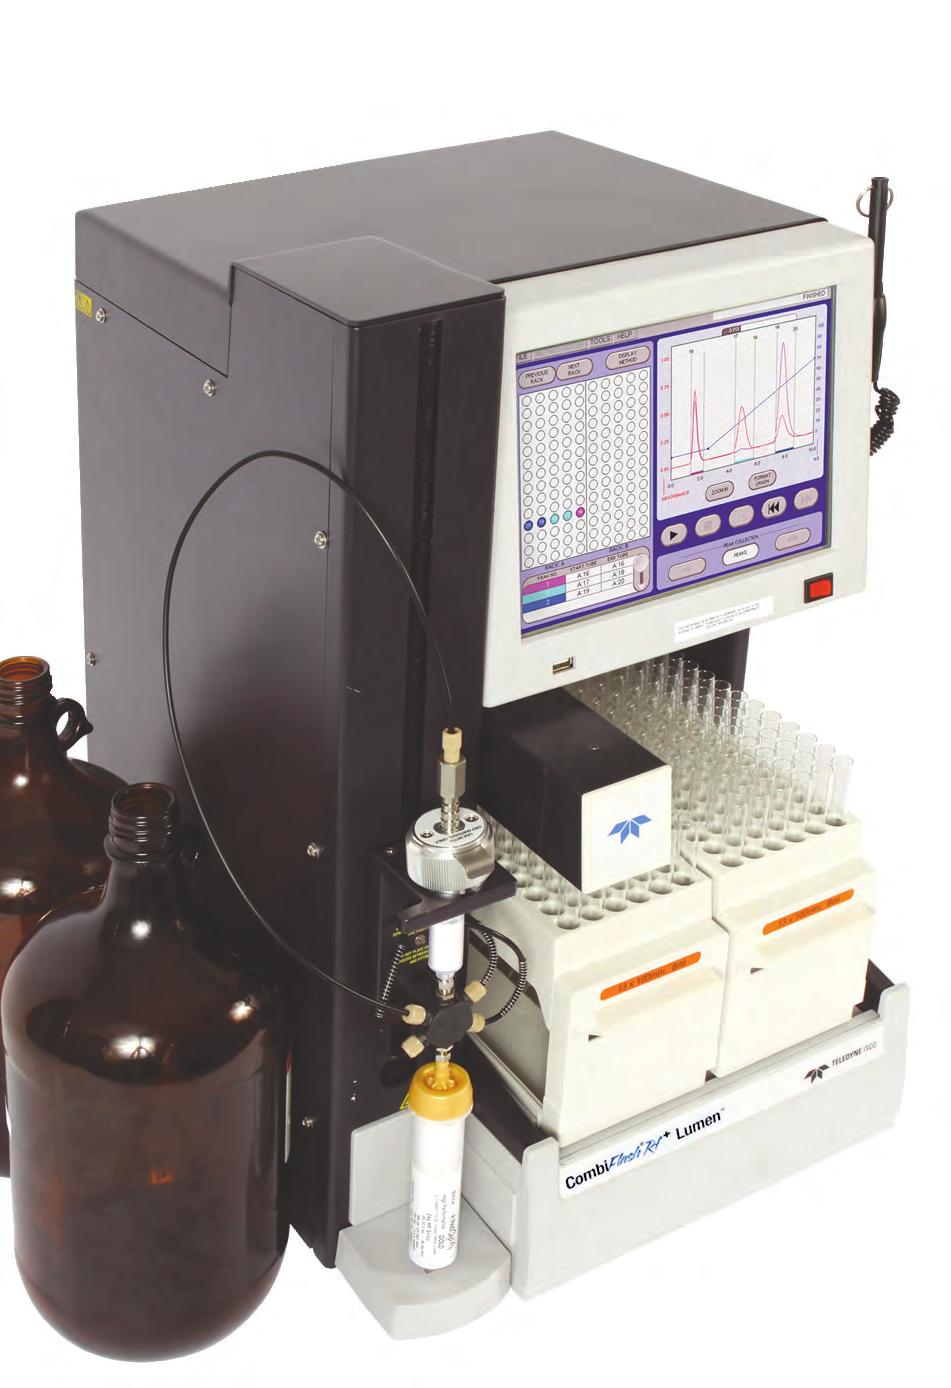 CombiFlash Rf + Lumen: Making Flash Chromatography Universal Integration of an Evaporative Light Scattering Detector (ELSD) allows detection of compounds with minimal UV absorption such as